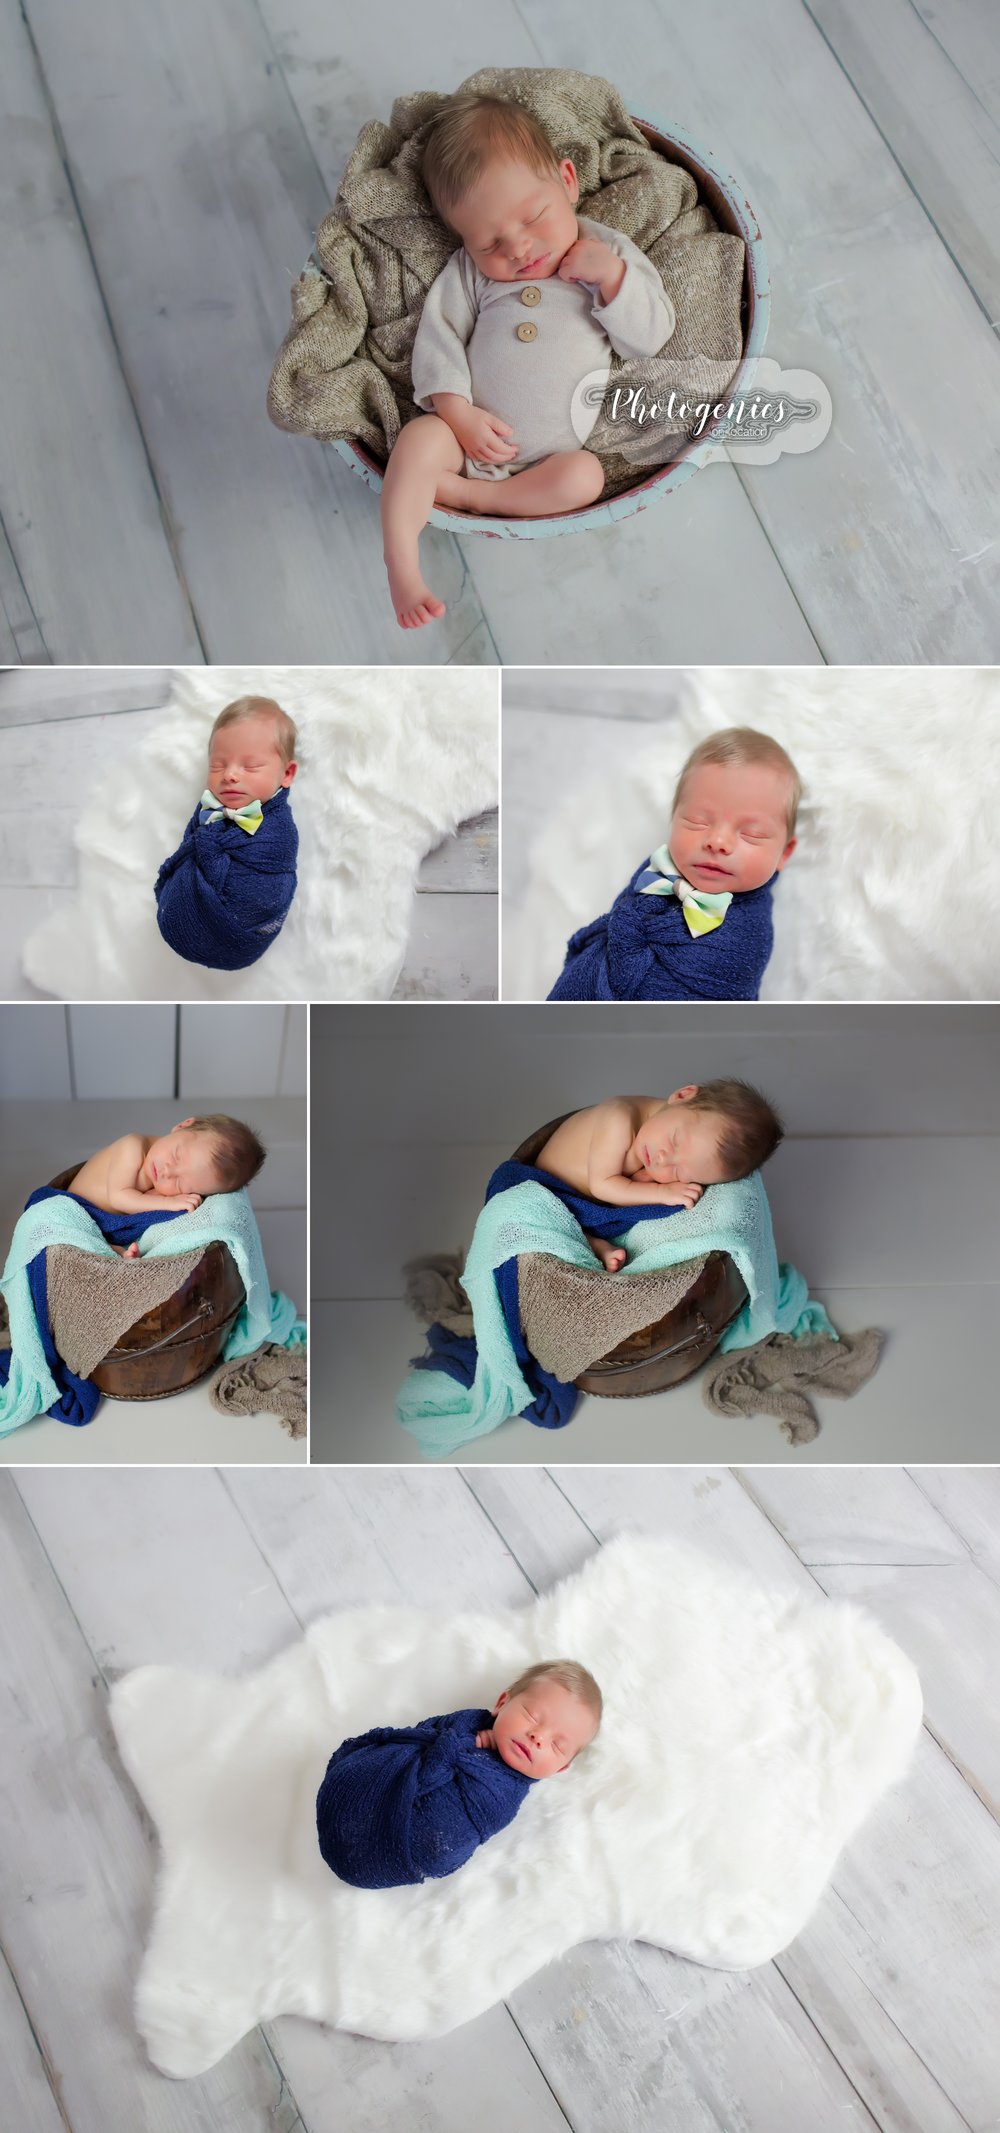  newborn_boy_photography_ideas_romper_hair_props_neutrals_simple_pictures_studio_baby_bowtie_shades_of_blue_teal_bucket_wood 1.jpg 